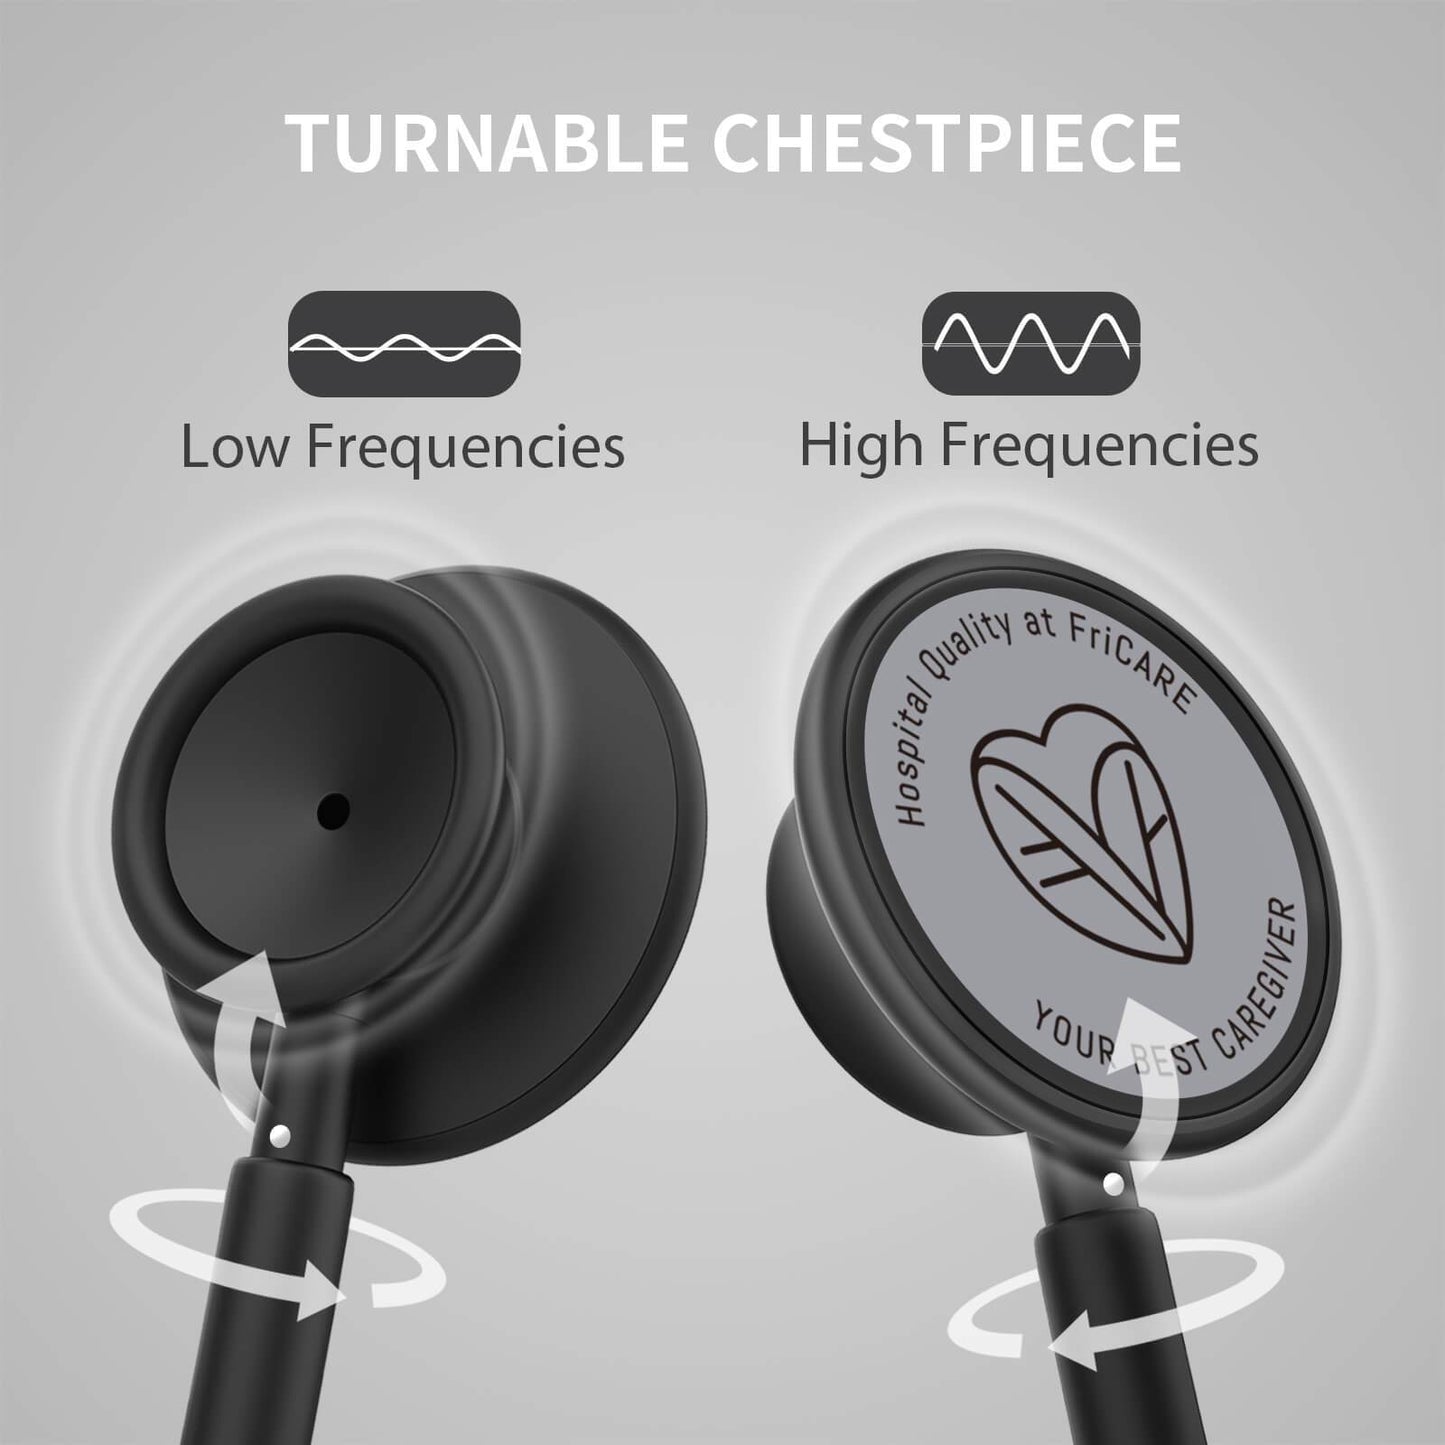 turnable chestpiece, low frequencies, high frequencies